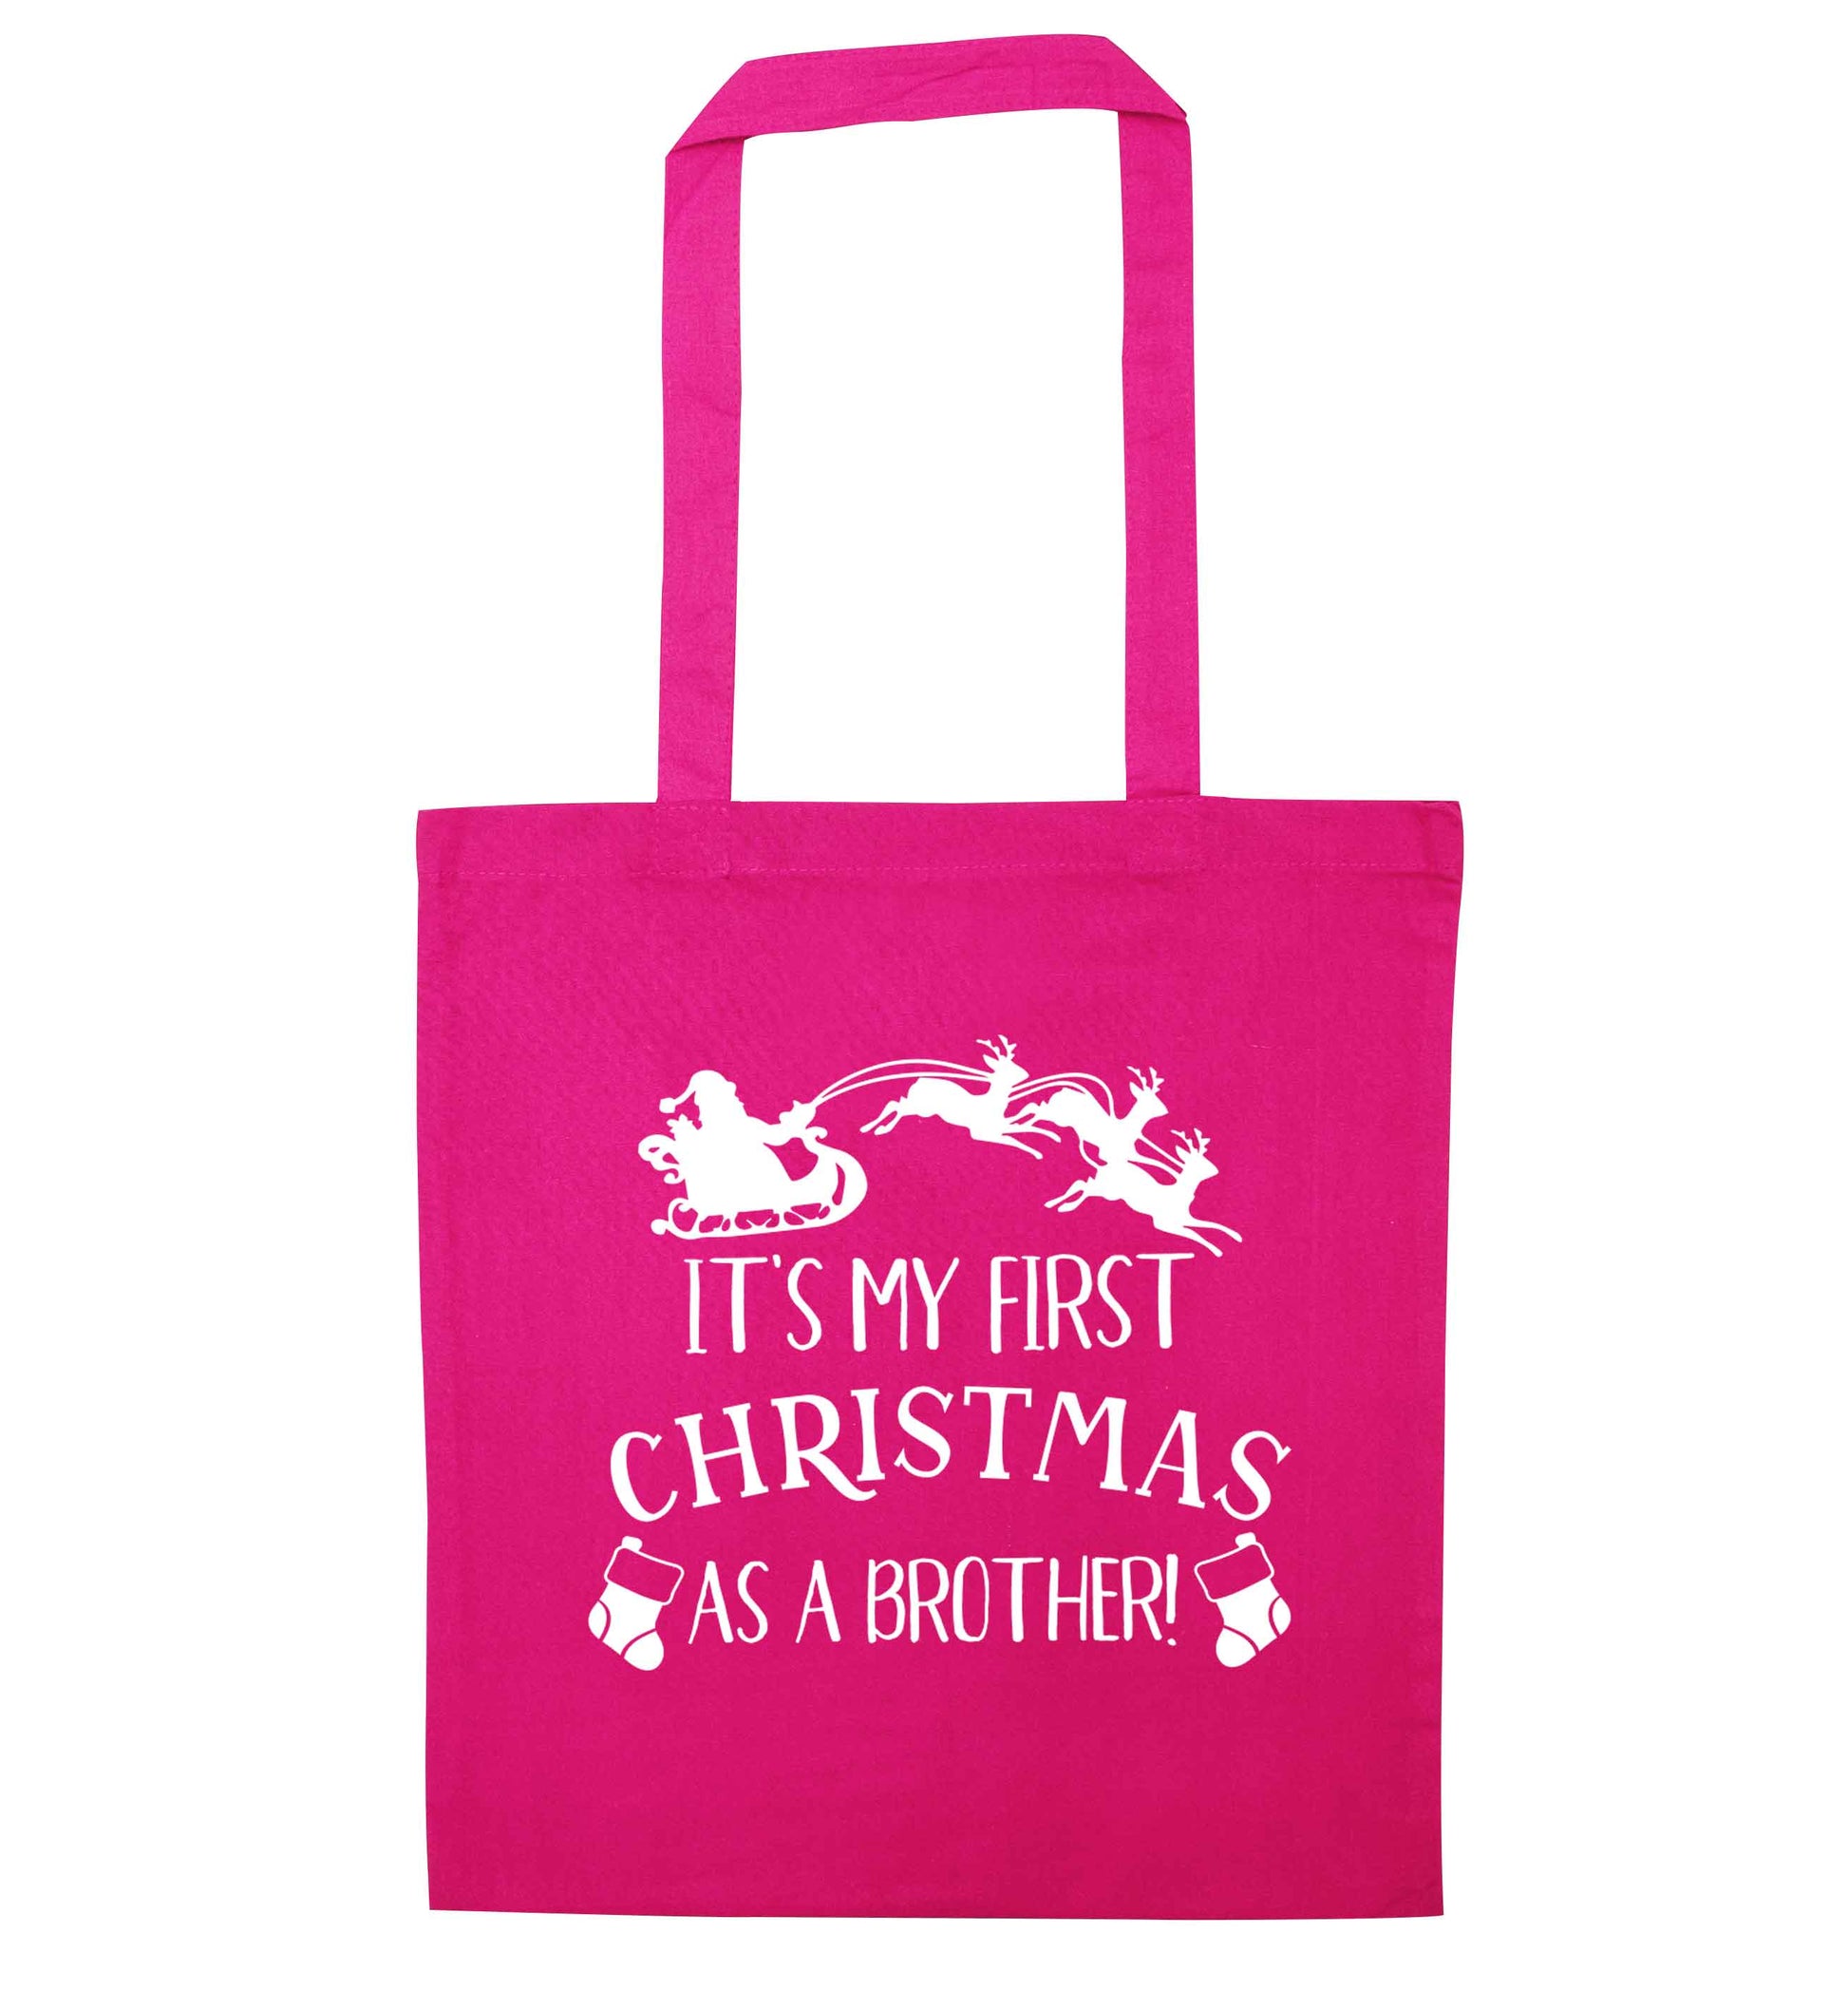 It's my first Christmas as a brother! pink tote bag